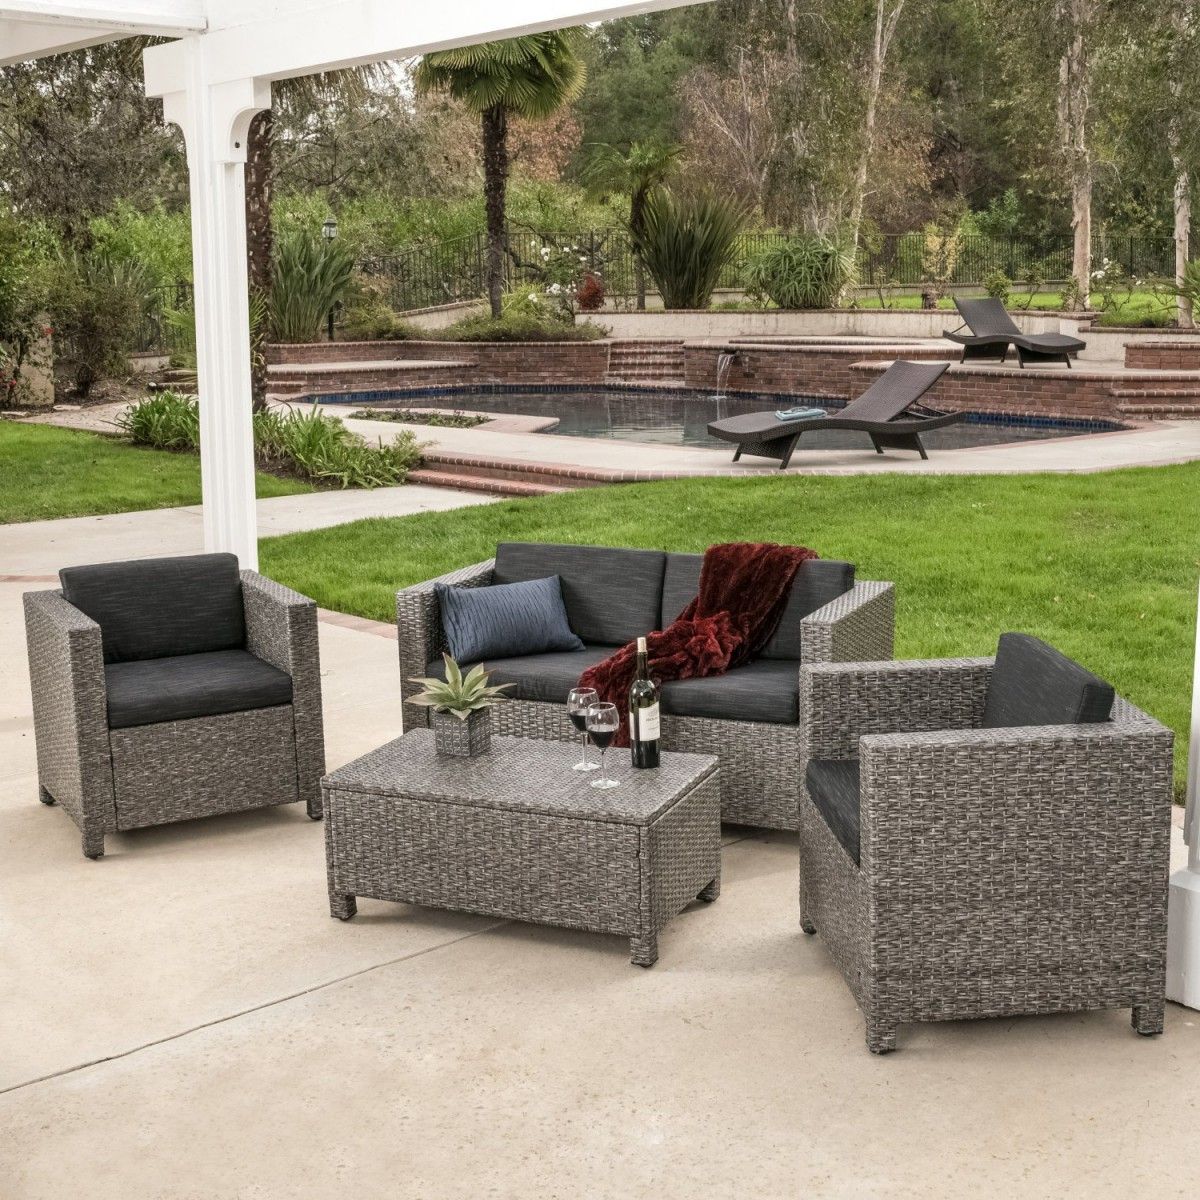 Black And Gray Outdoor Table And Chair Sets With Recent Venice 4 Piece Grey/black Wicker Outdoor Sectional Sofa Set (View 12 of 15)